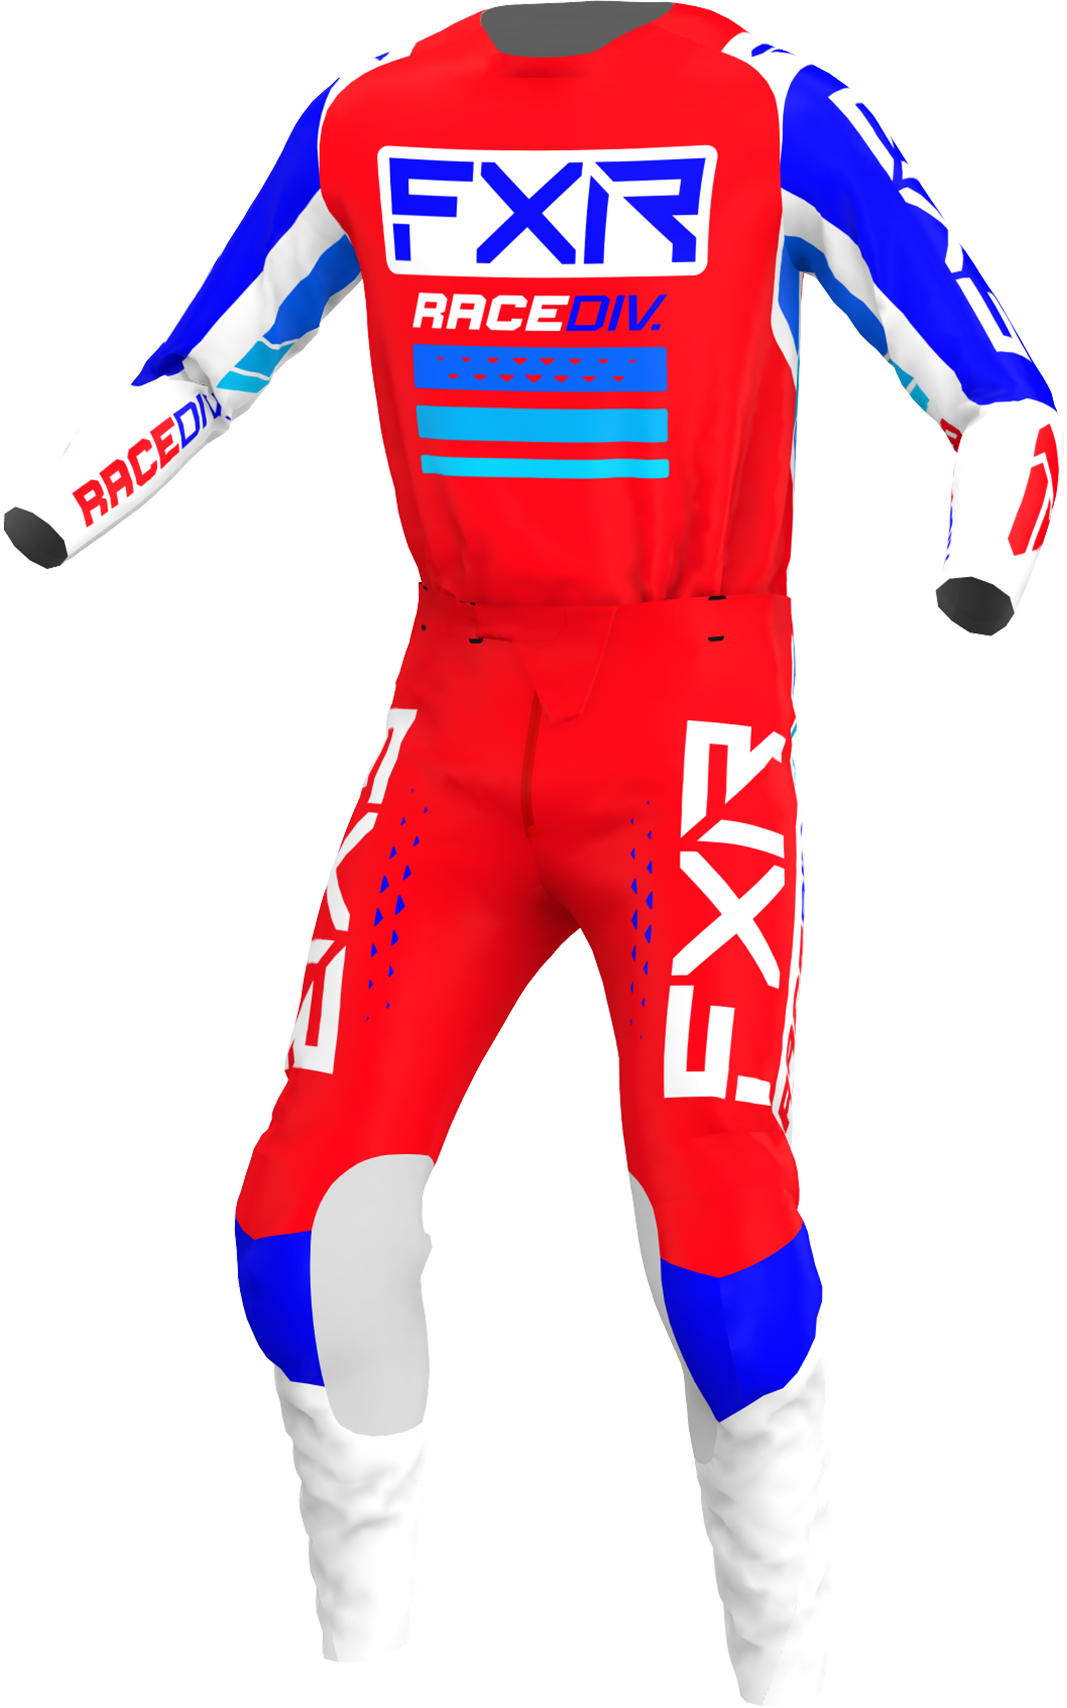 A 3D image of FXR’s Clutch Pro MX Jersey and Pant 22 in Red / Royal Blue / White colorway